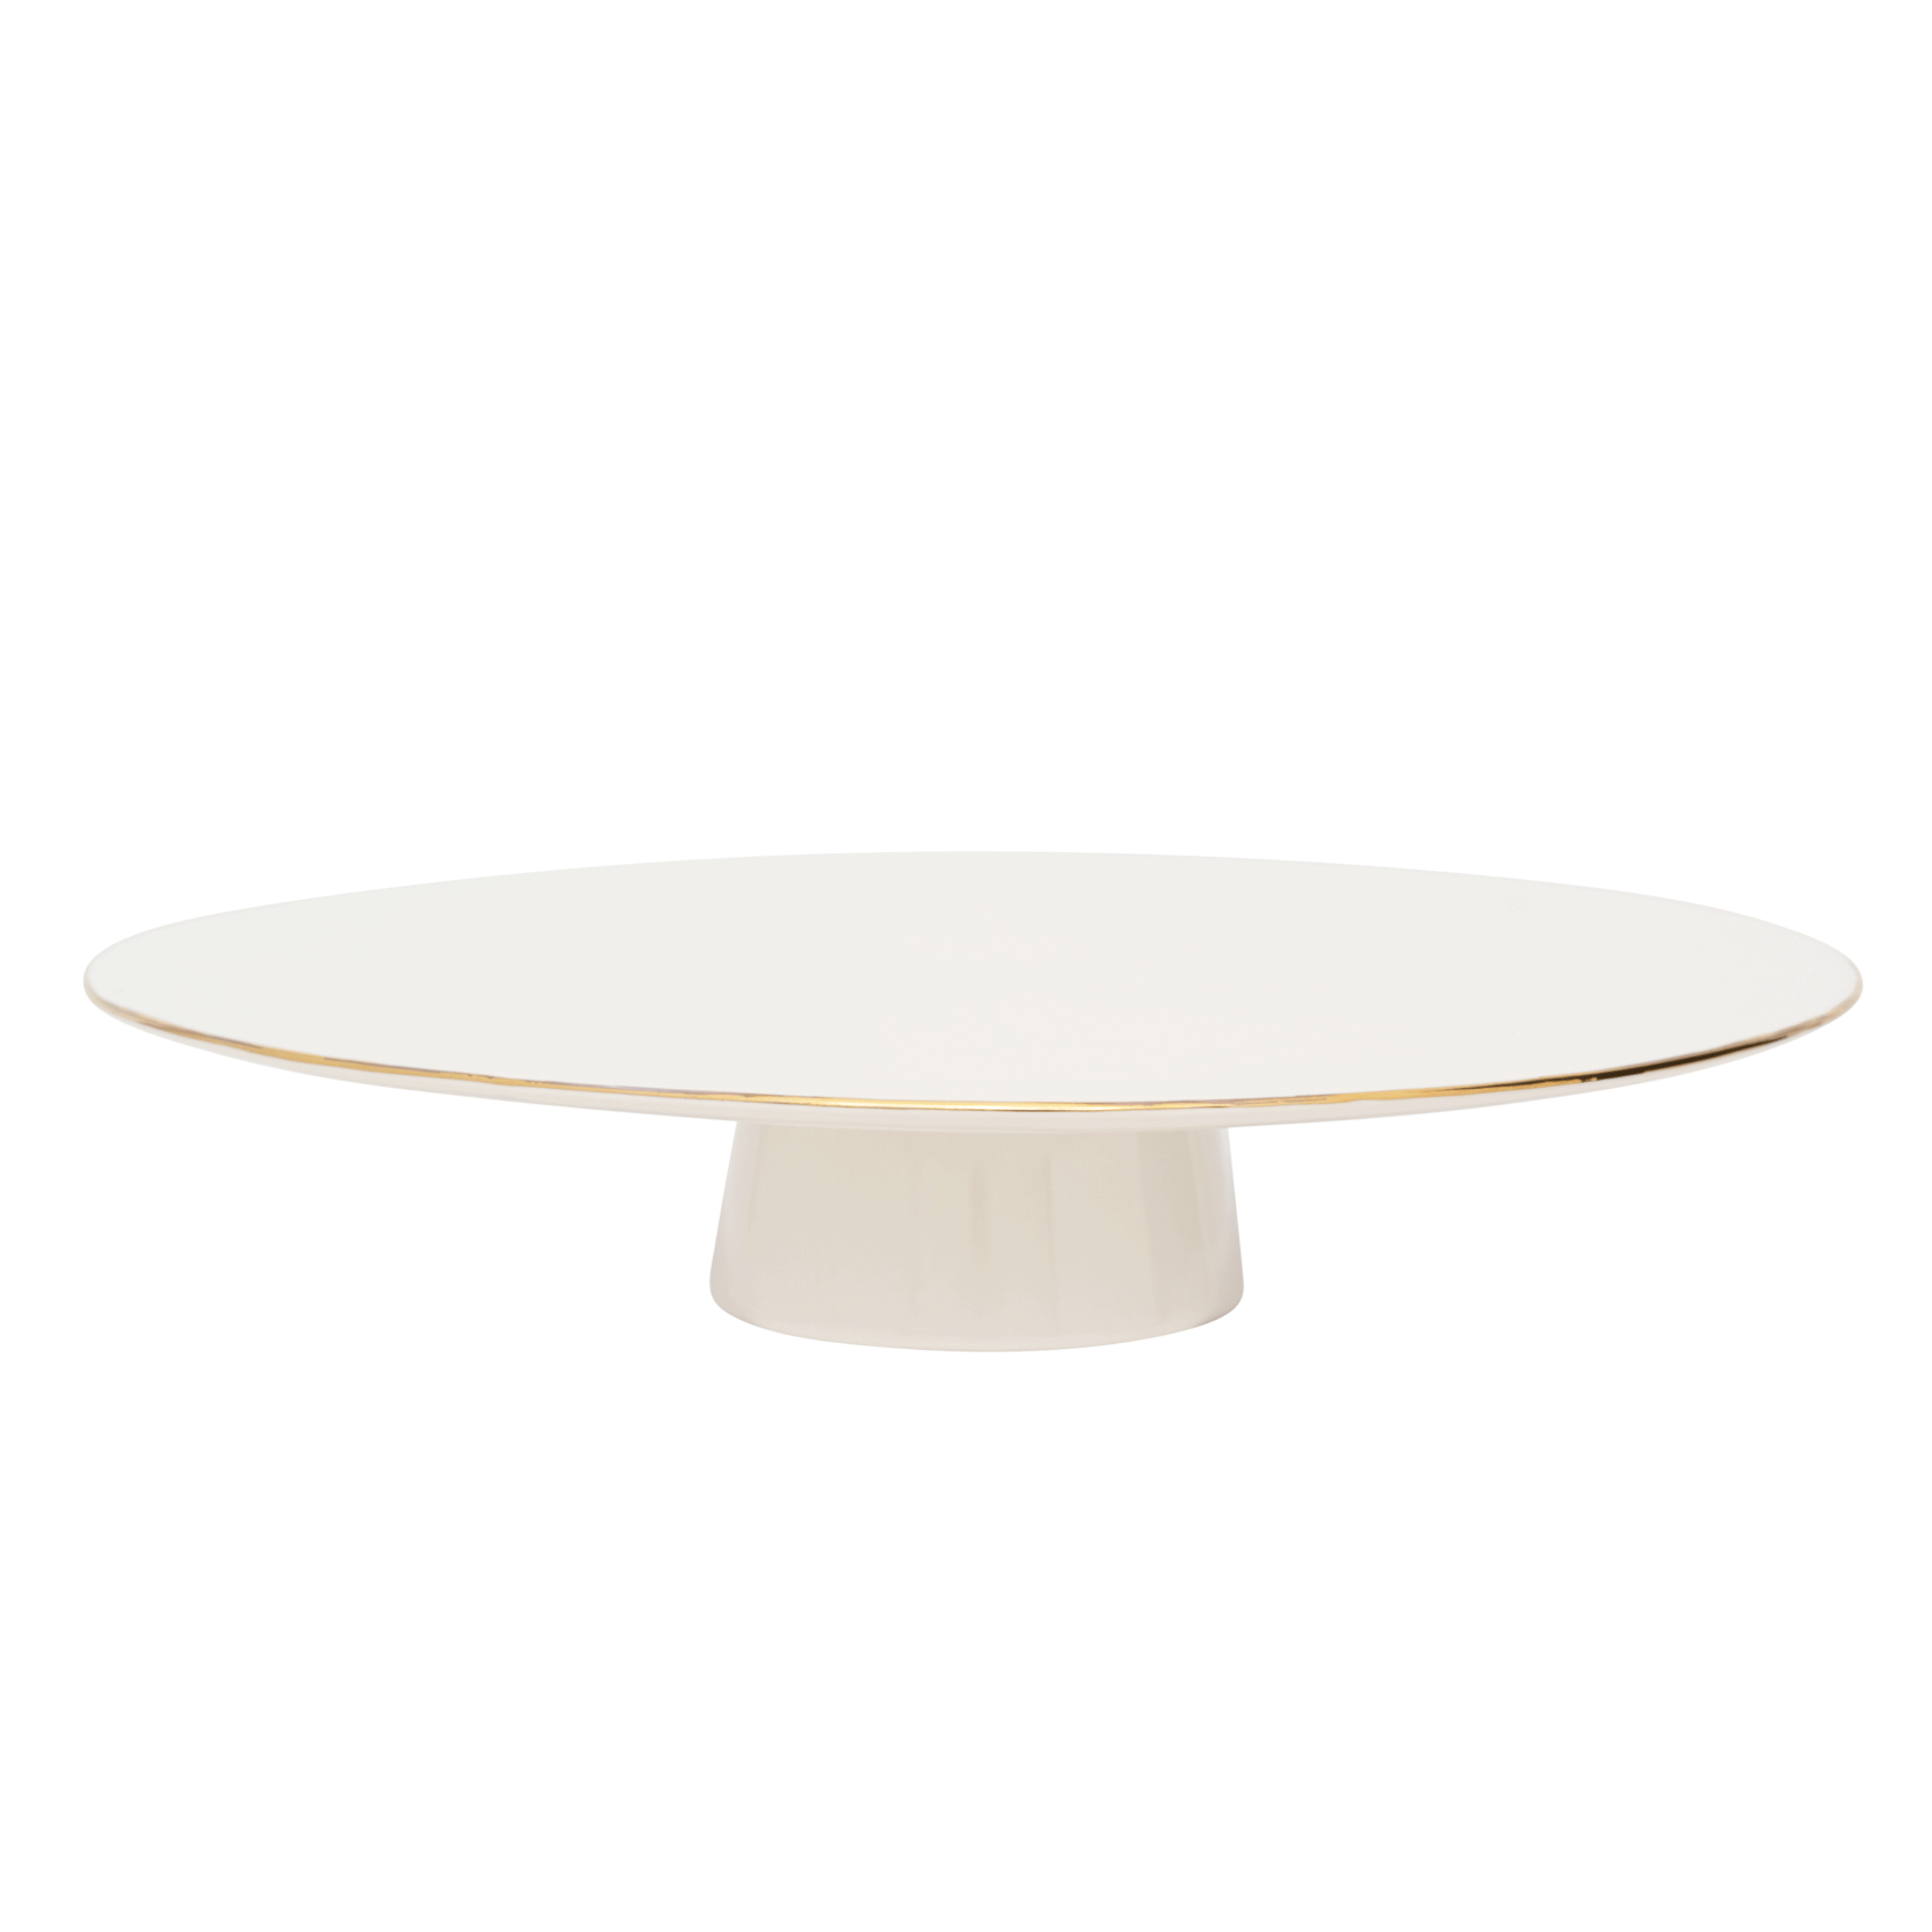 Urban Nature Culture Good Morning - Cake Stand